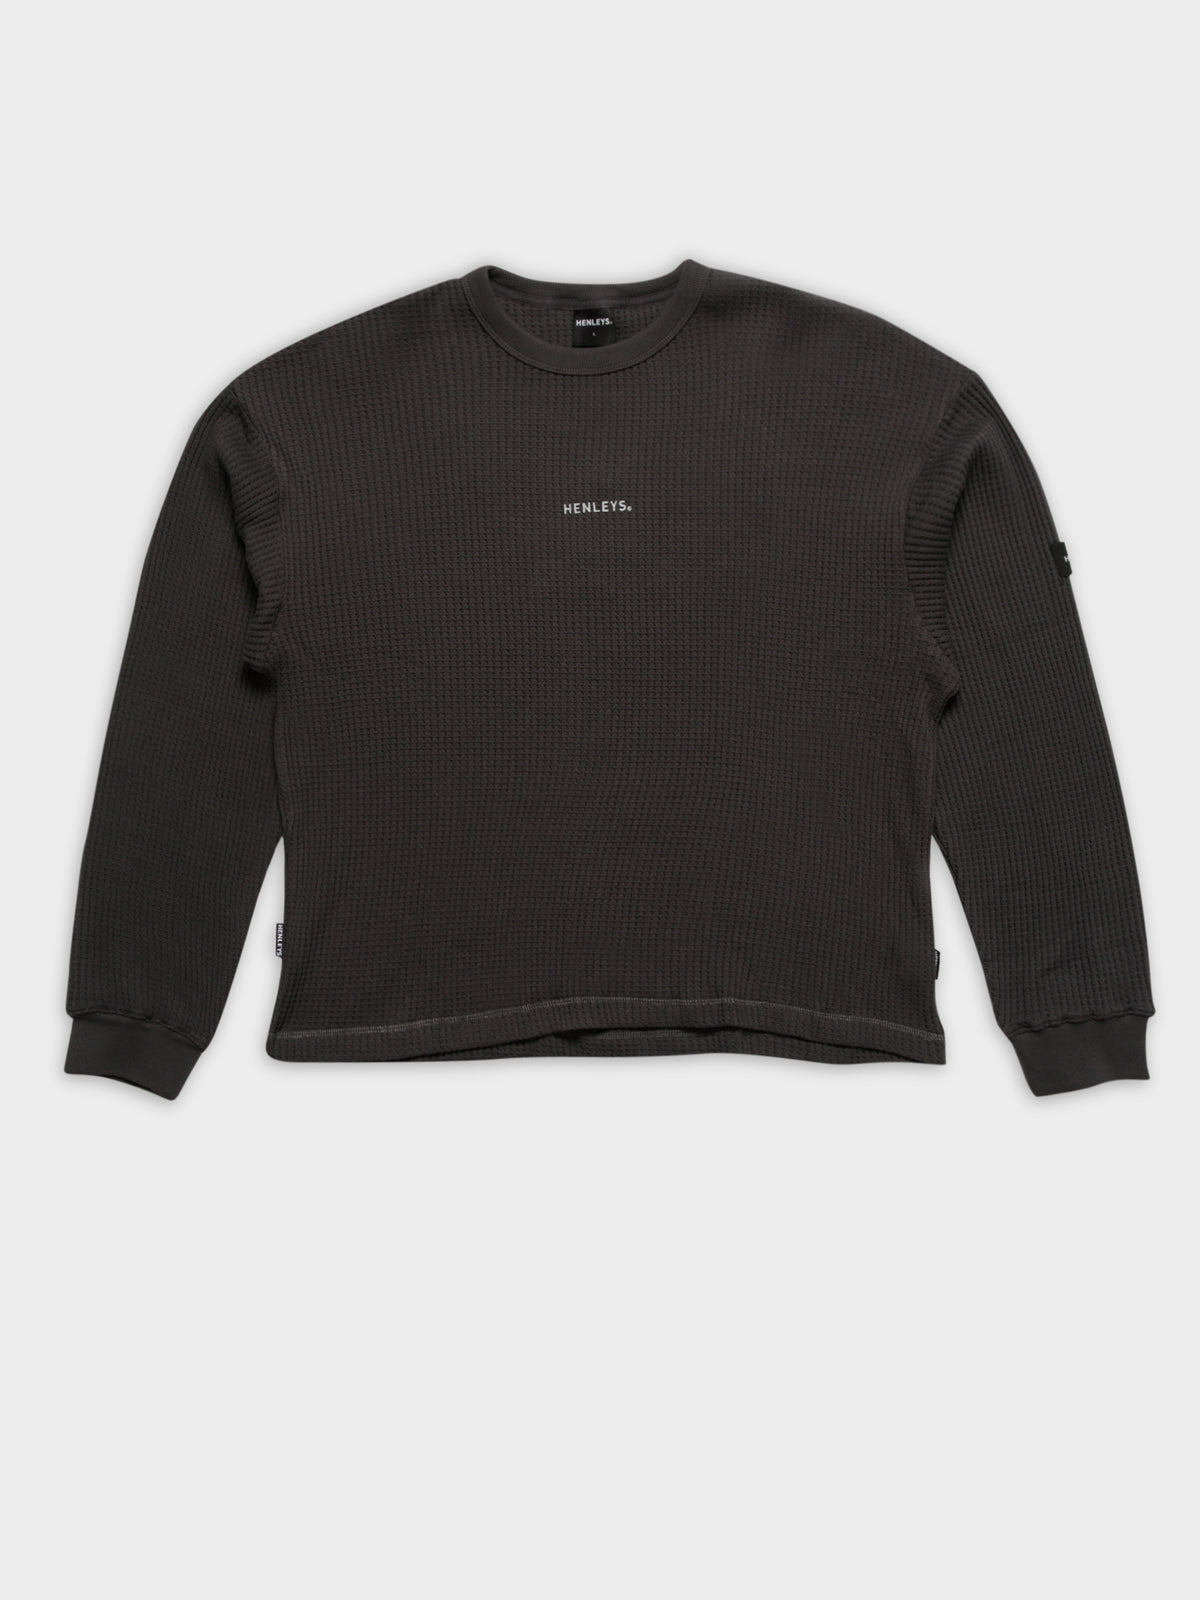 Alltime Waffle Long Sleeve in Washed Black